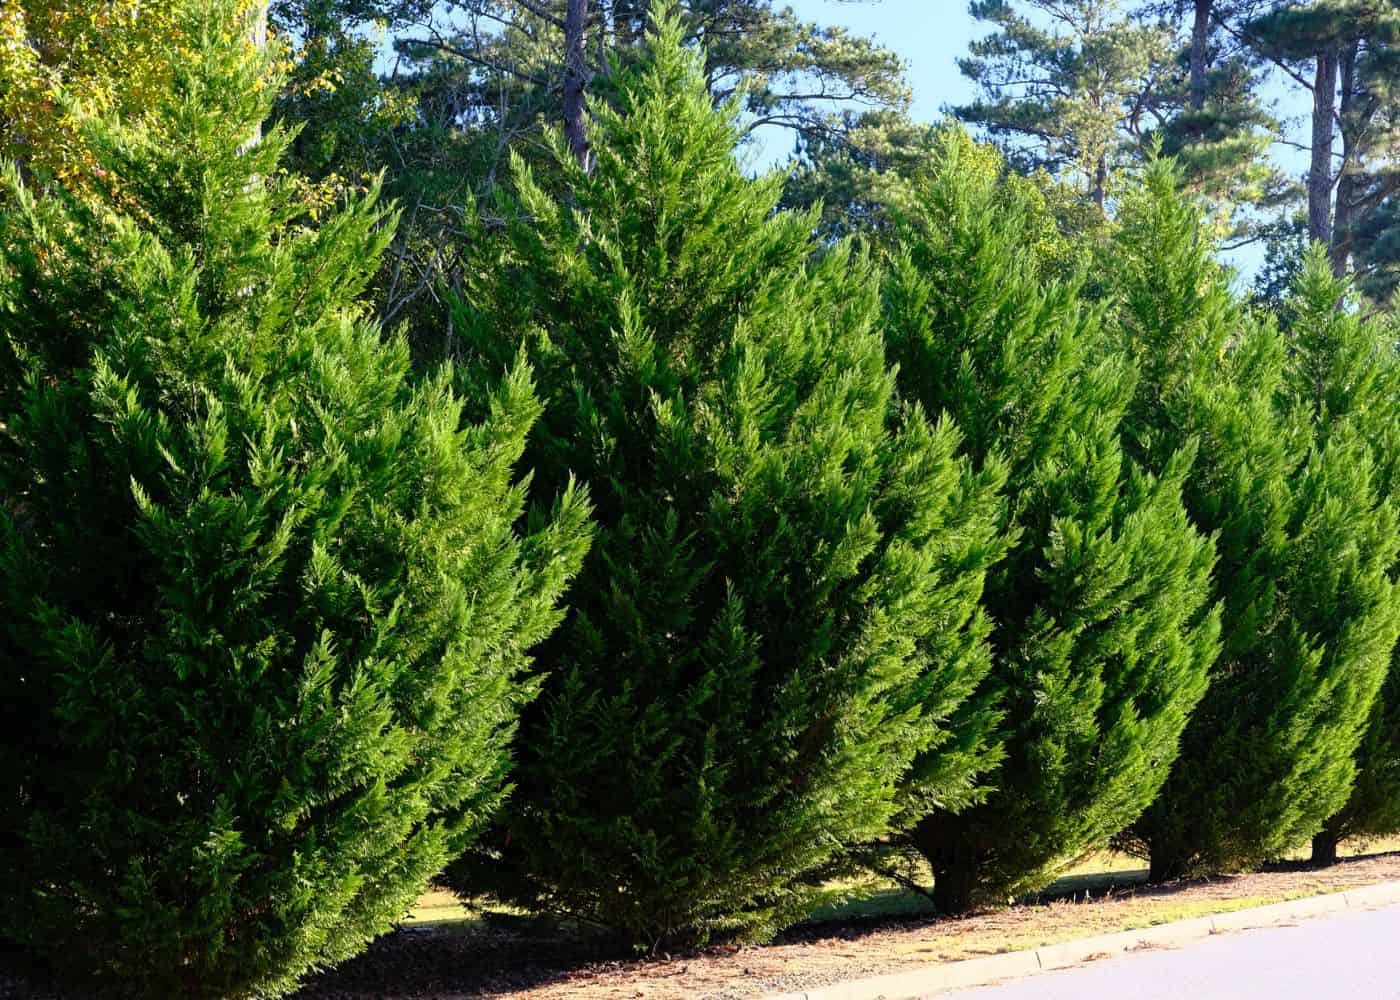 The leyland cypress - growing in a row along a road